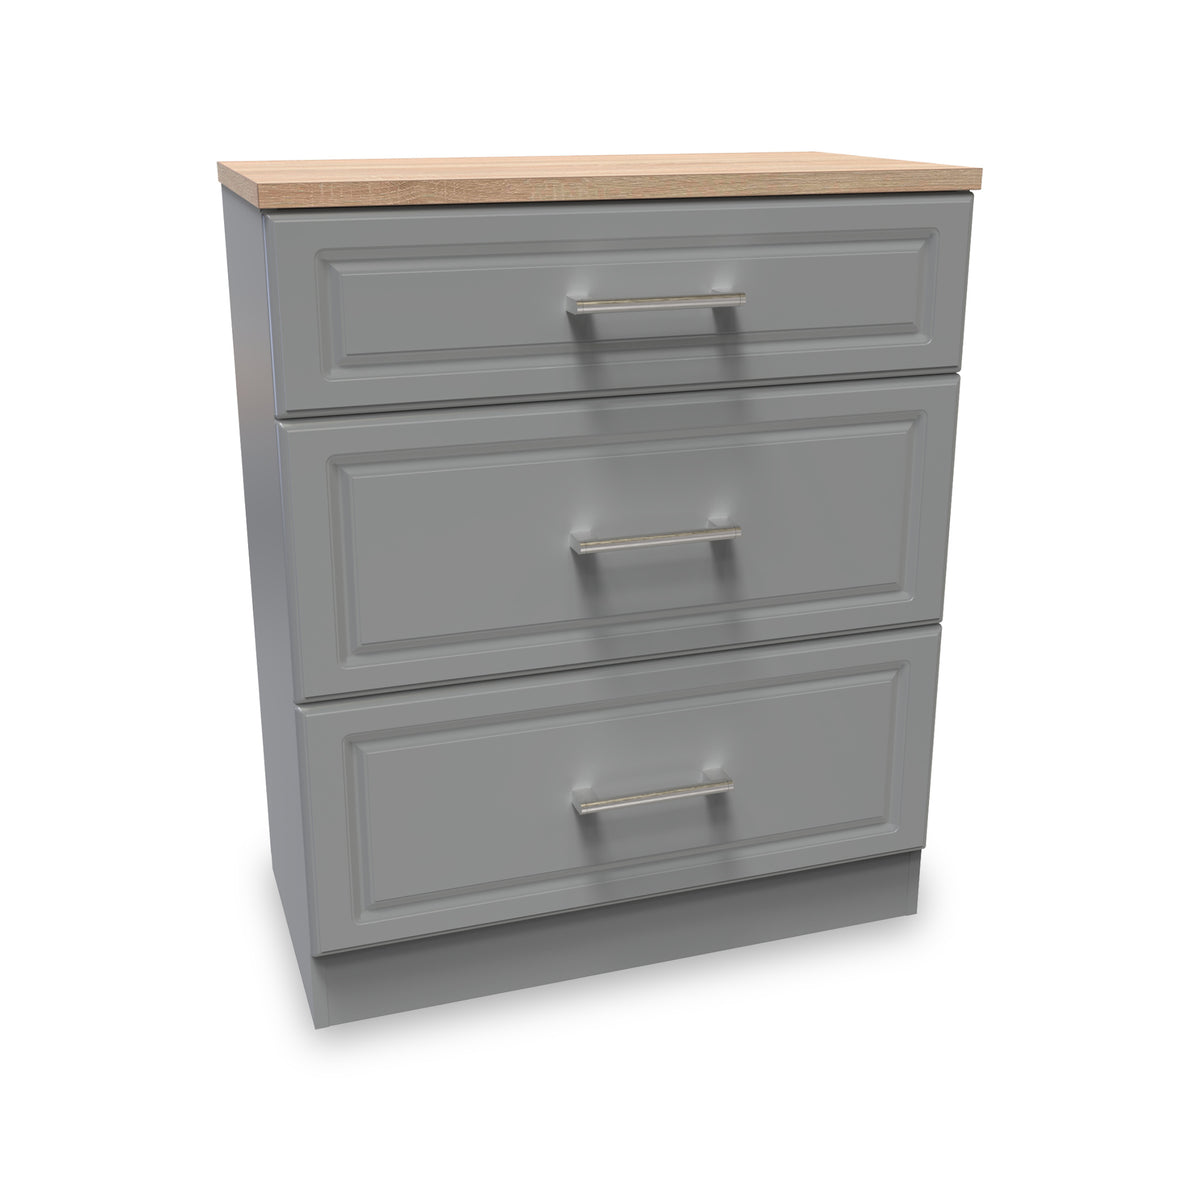 Talland Grey 4 Piece Bedroom Set with Oak Tops - 3 deep drawer chest